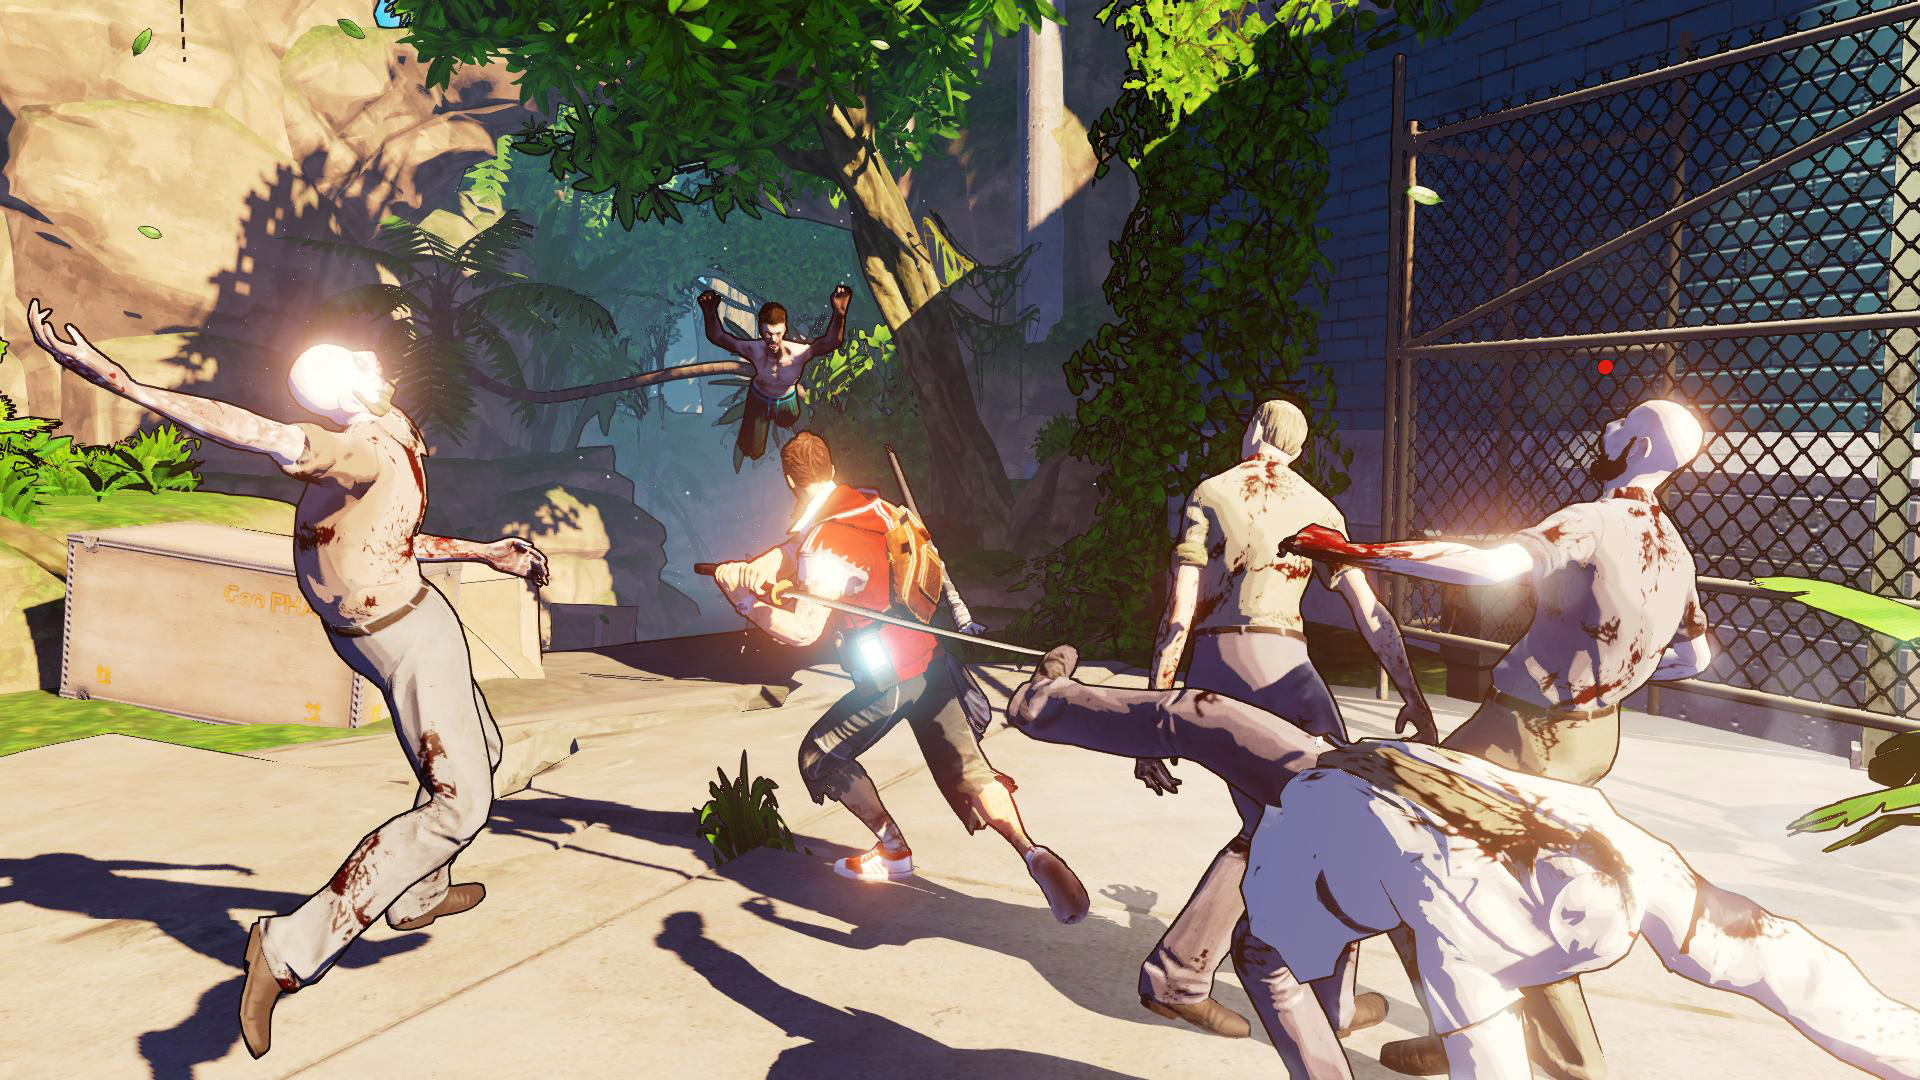 Save 85% on Escape Dead Island on Steam